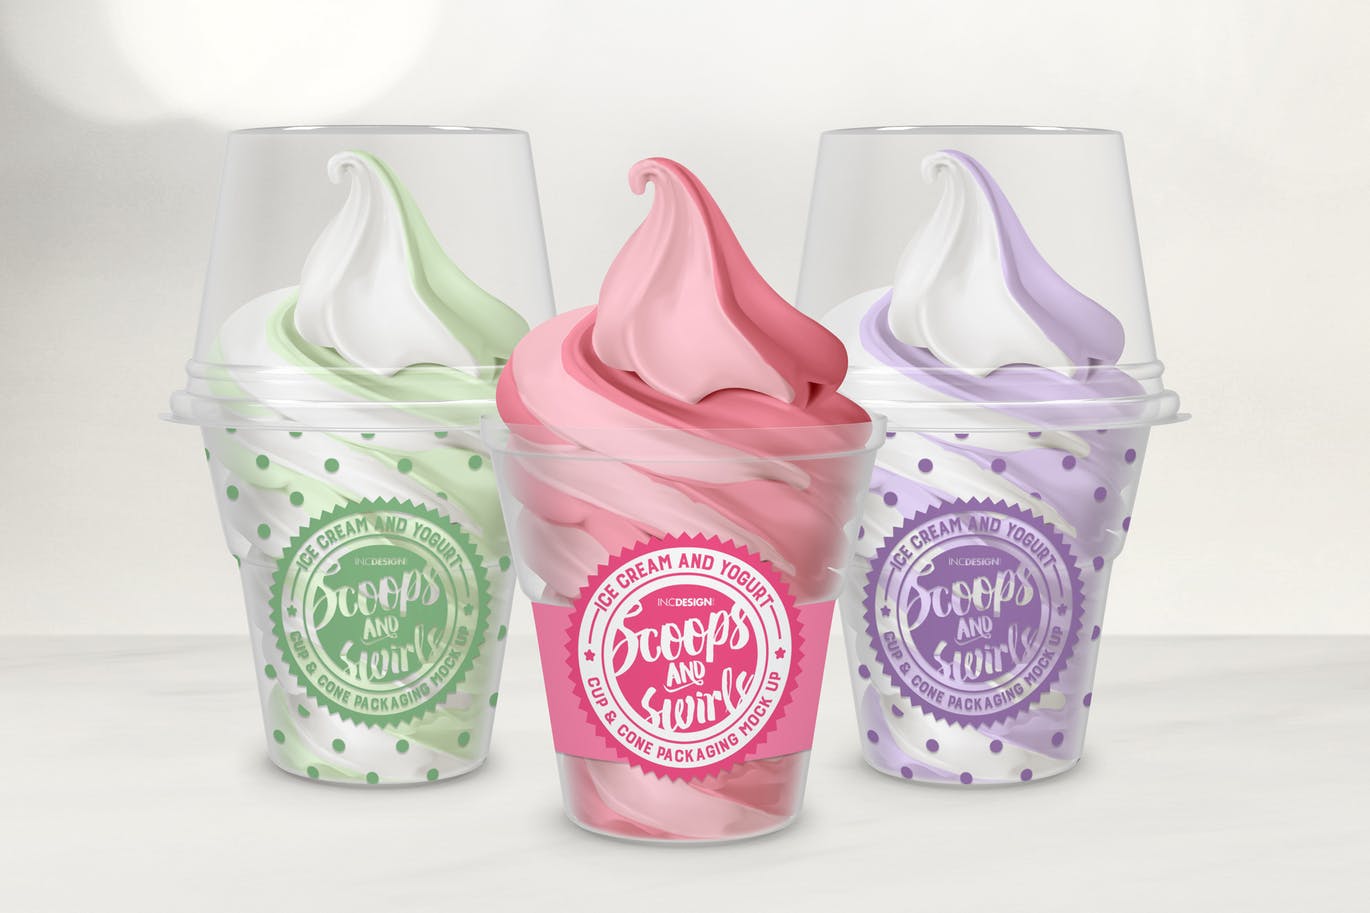 Clear ice cream packaging mockup template